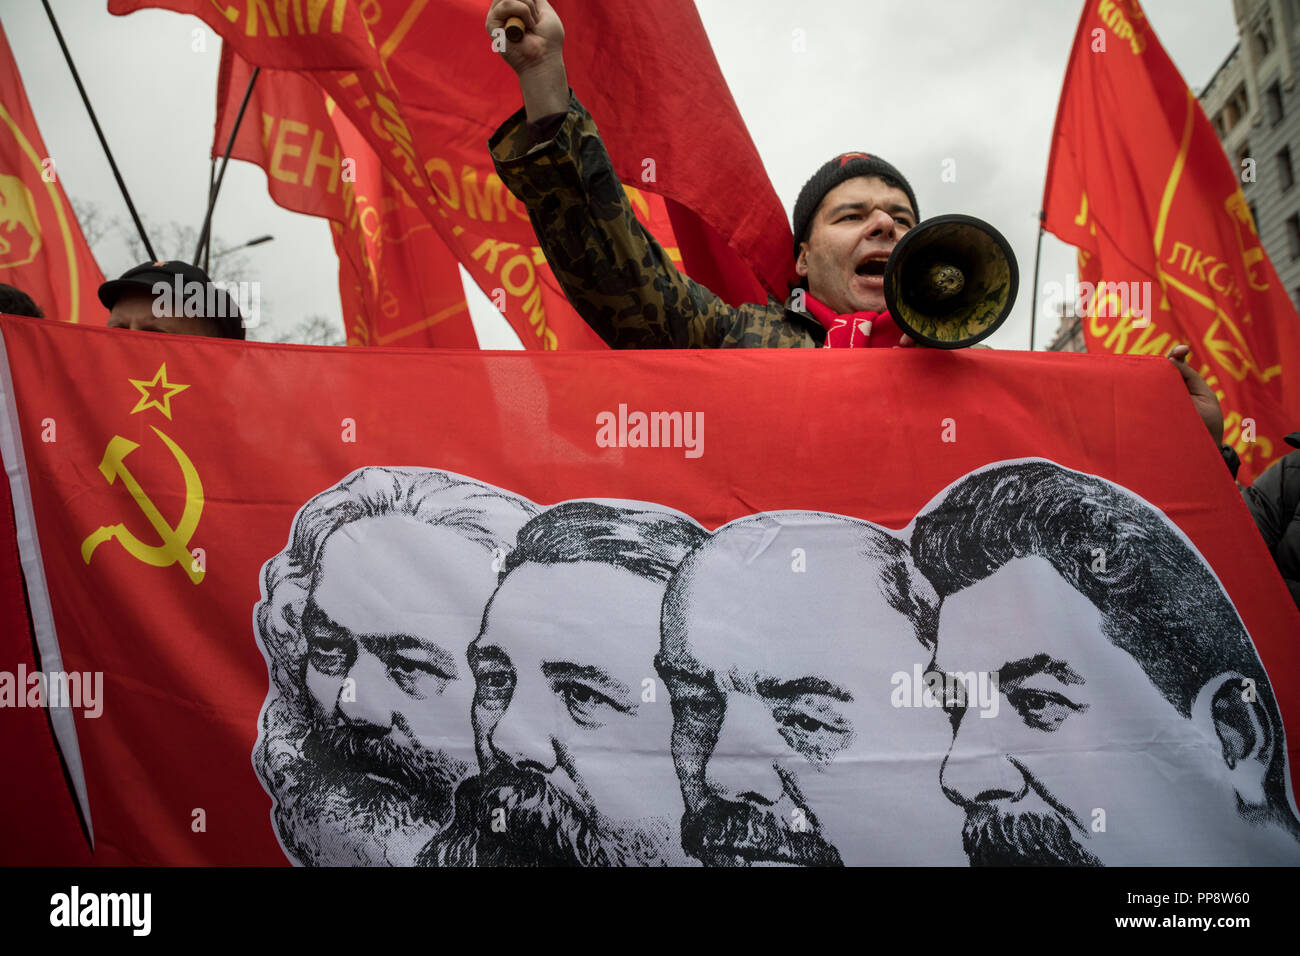 Supporters of the Communist Party of the Russian Federation (CPRF) from different countries march through central Moscow in Russia on November 7, 2017 Stock Photo